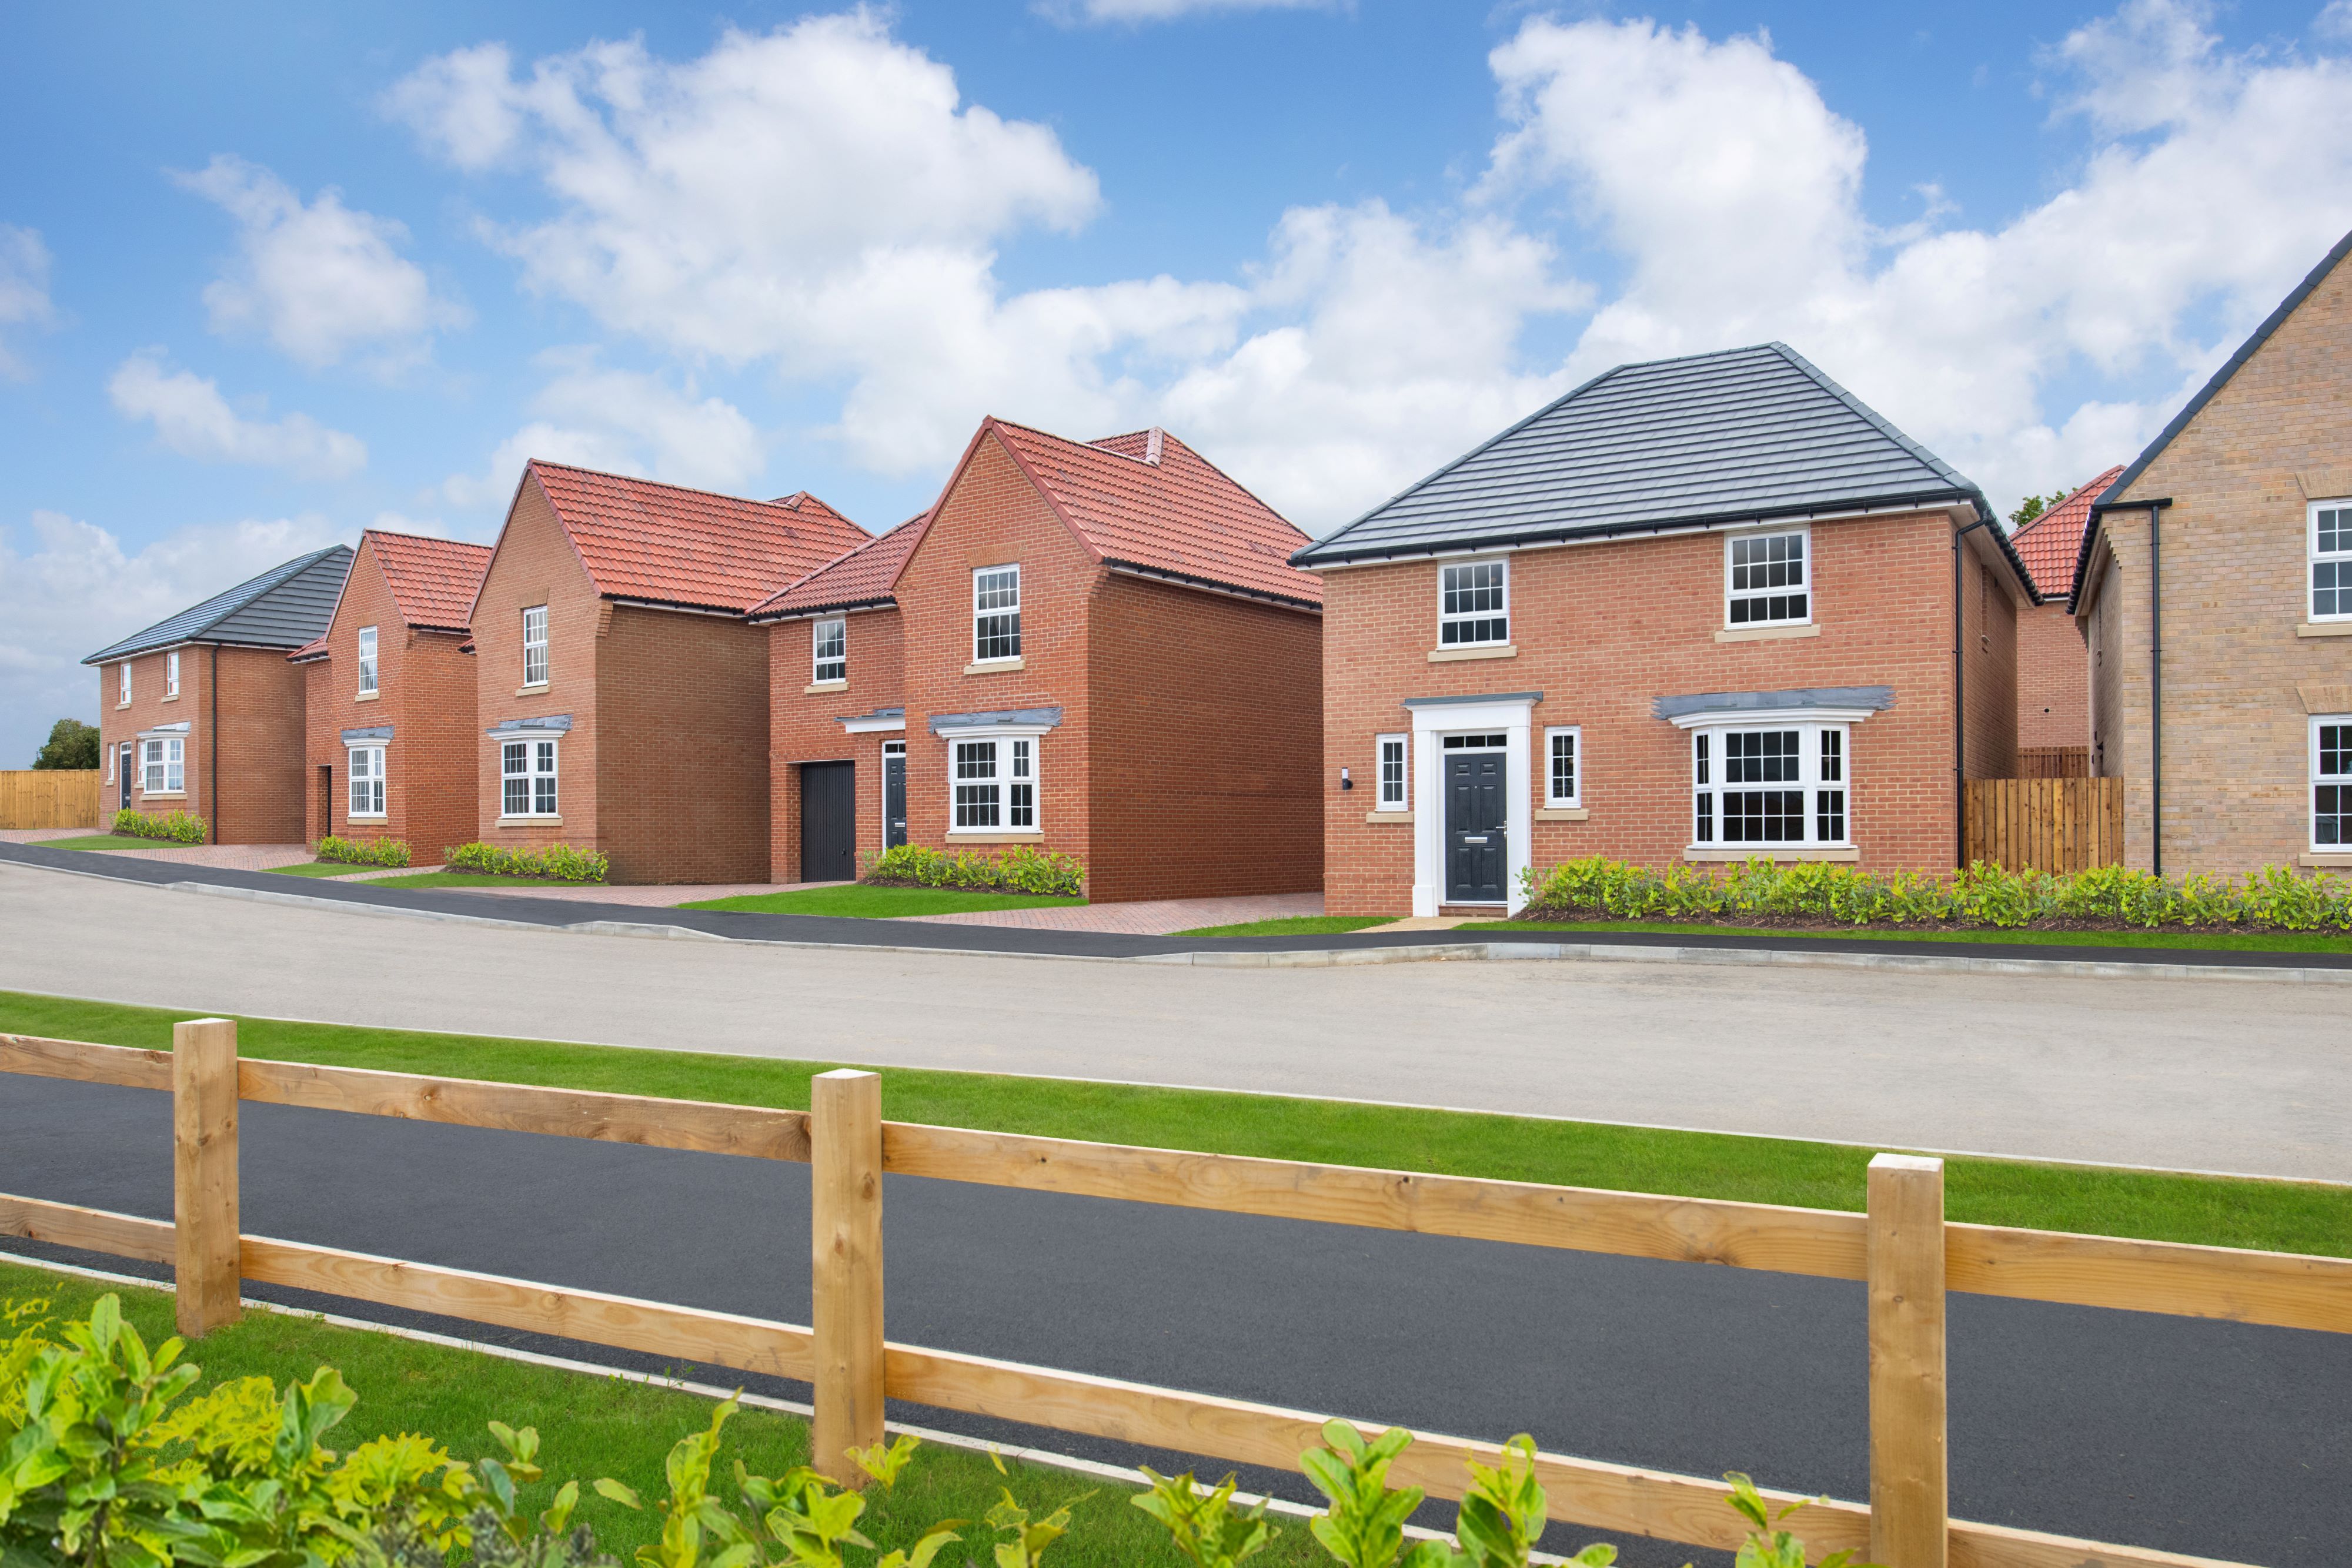 Images David Wilson Homes - Doxford Green